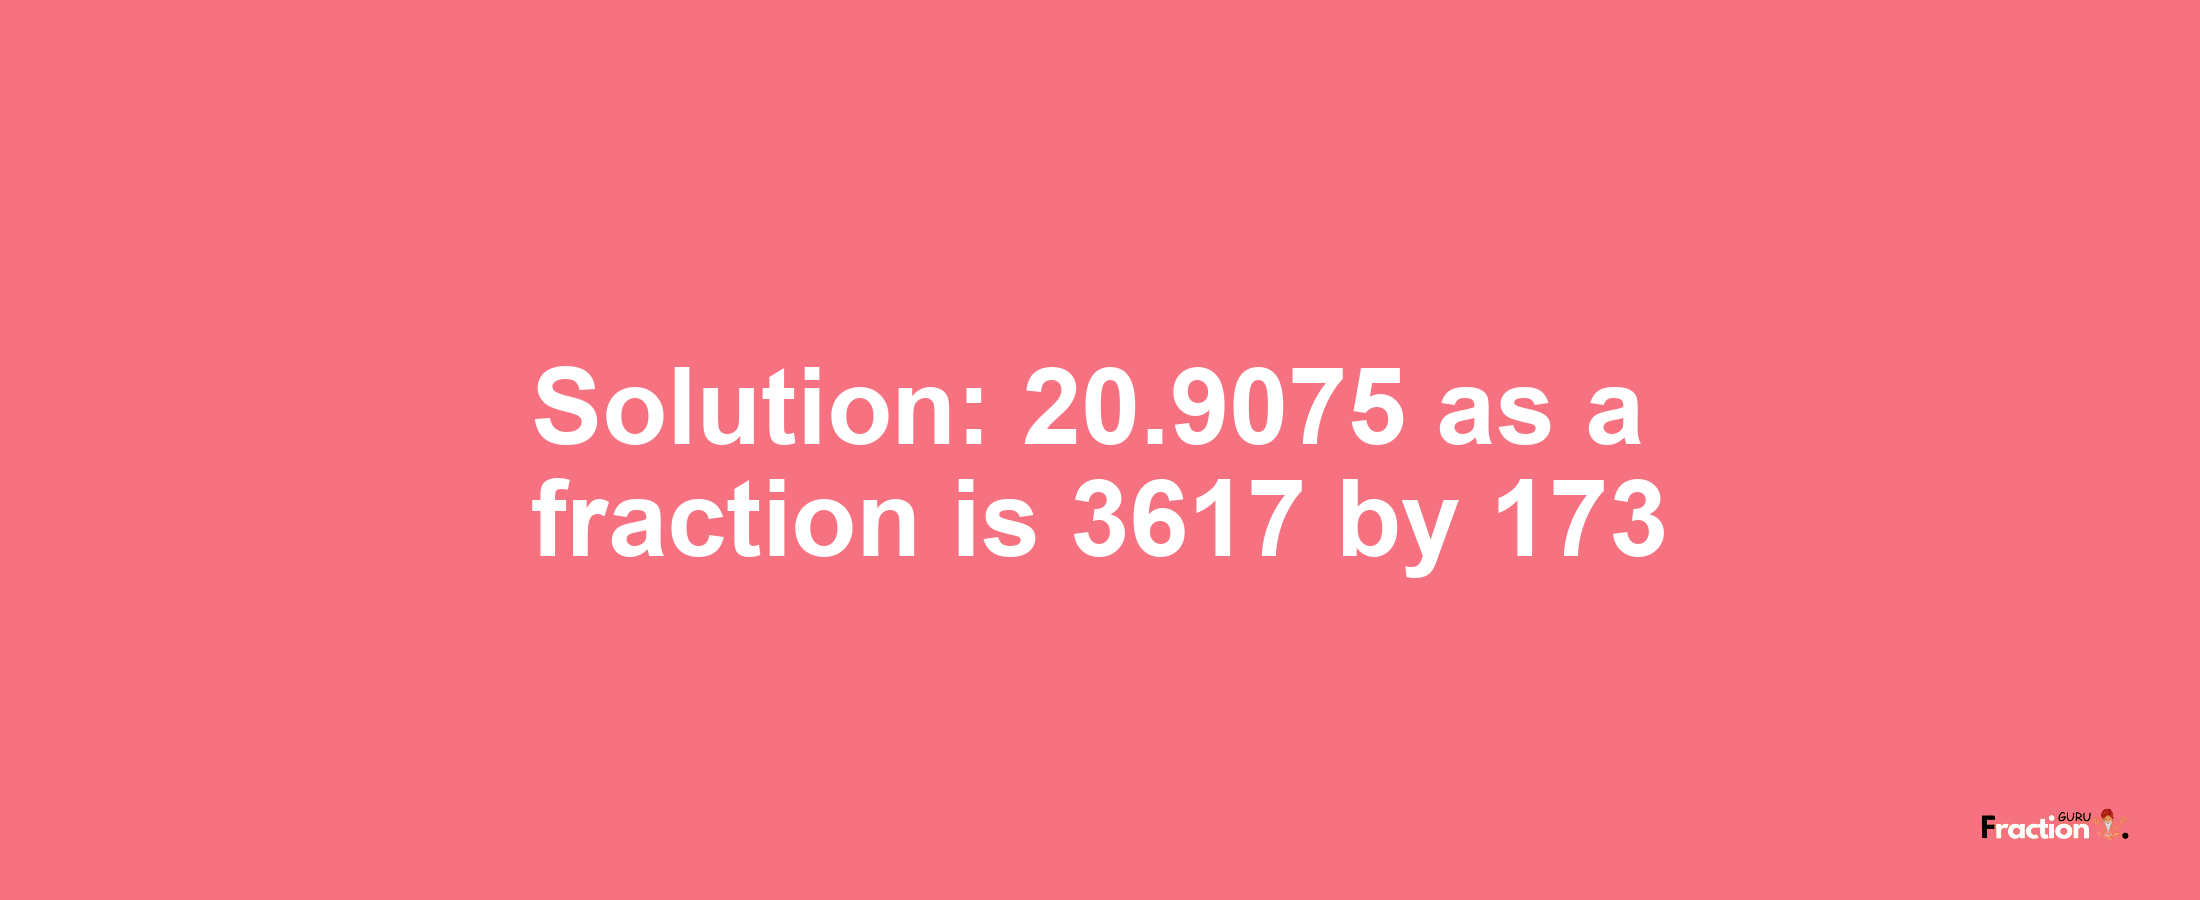 Solution:20.9075 as a fraction is 3617/173